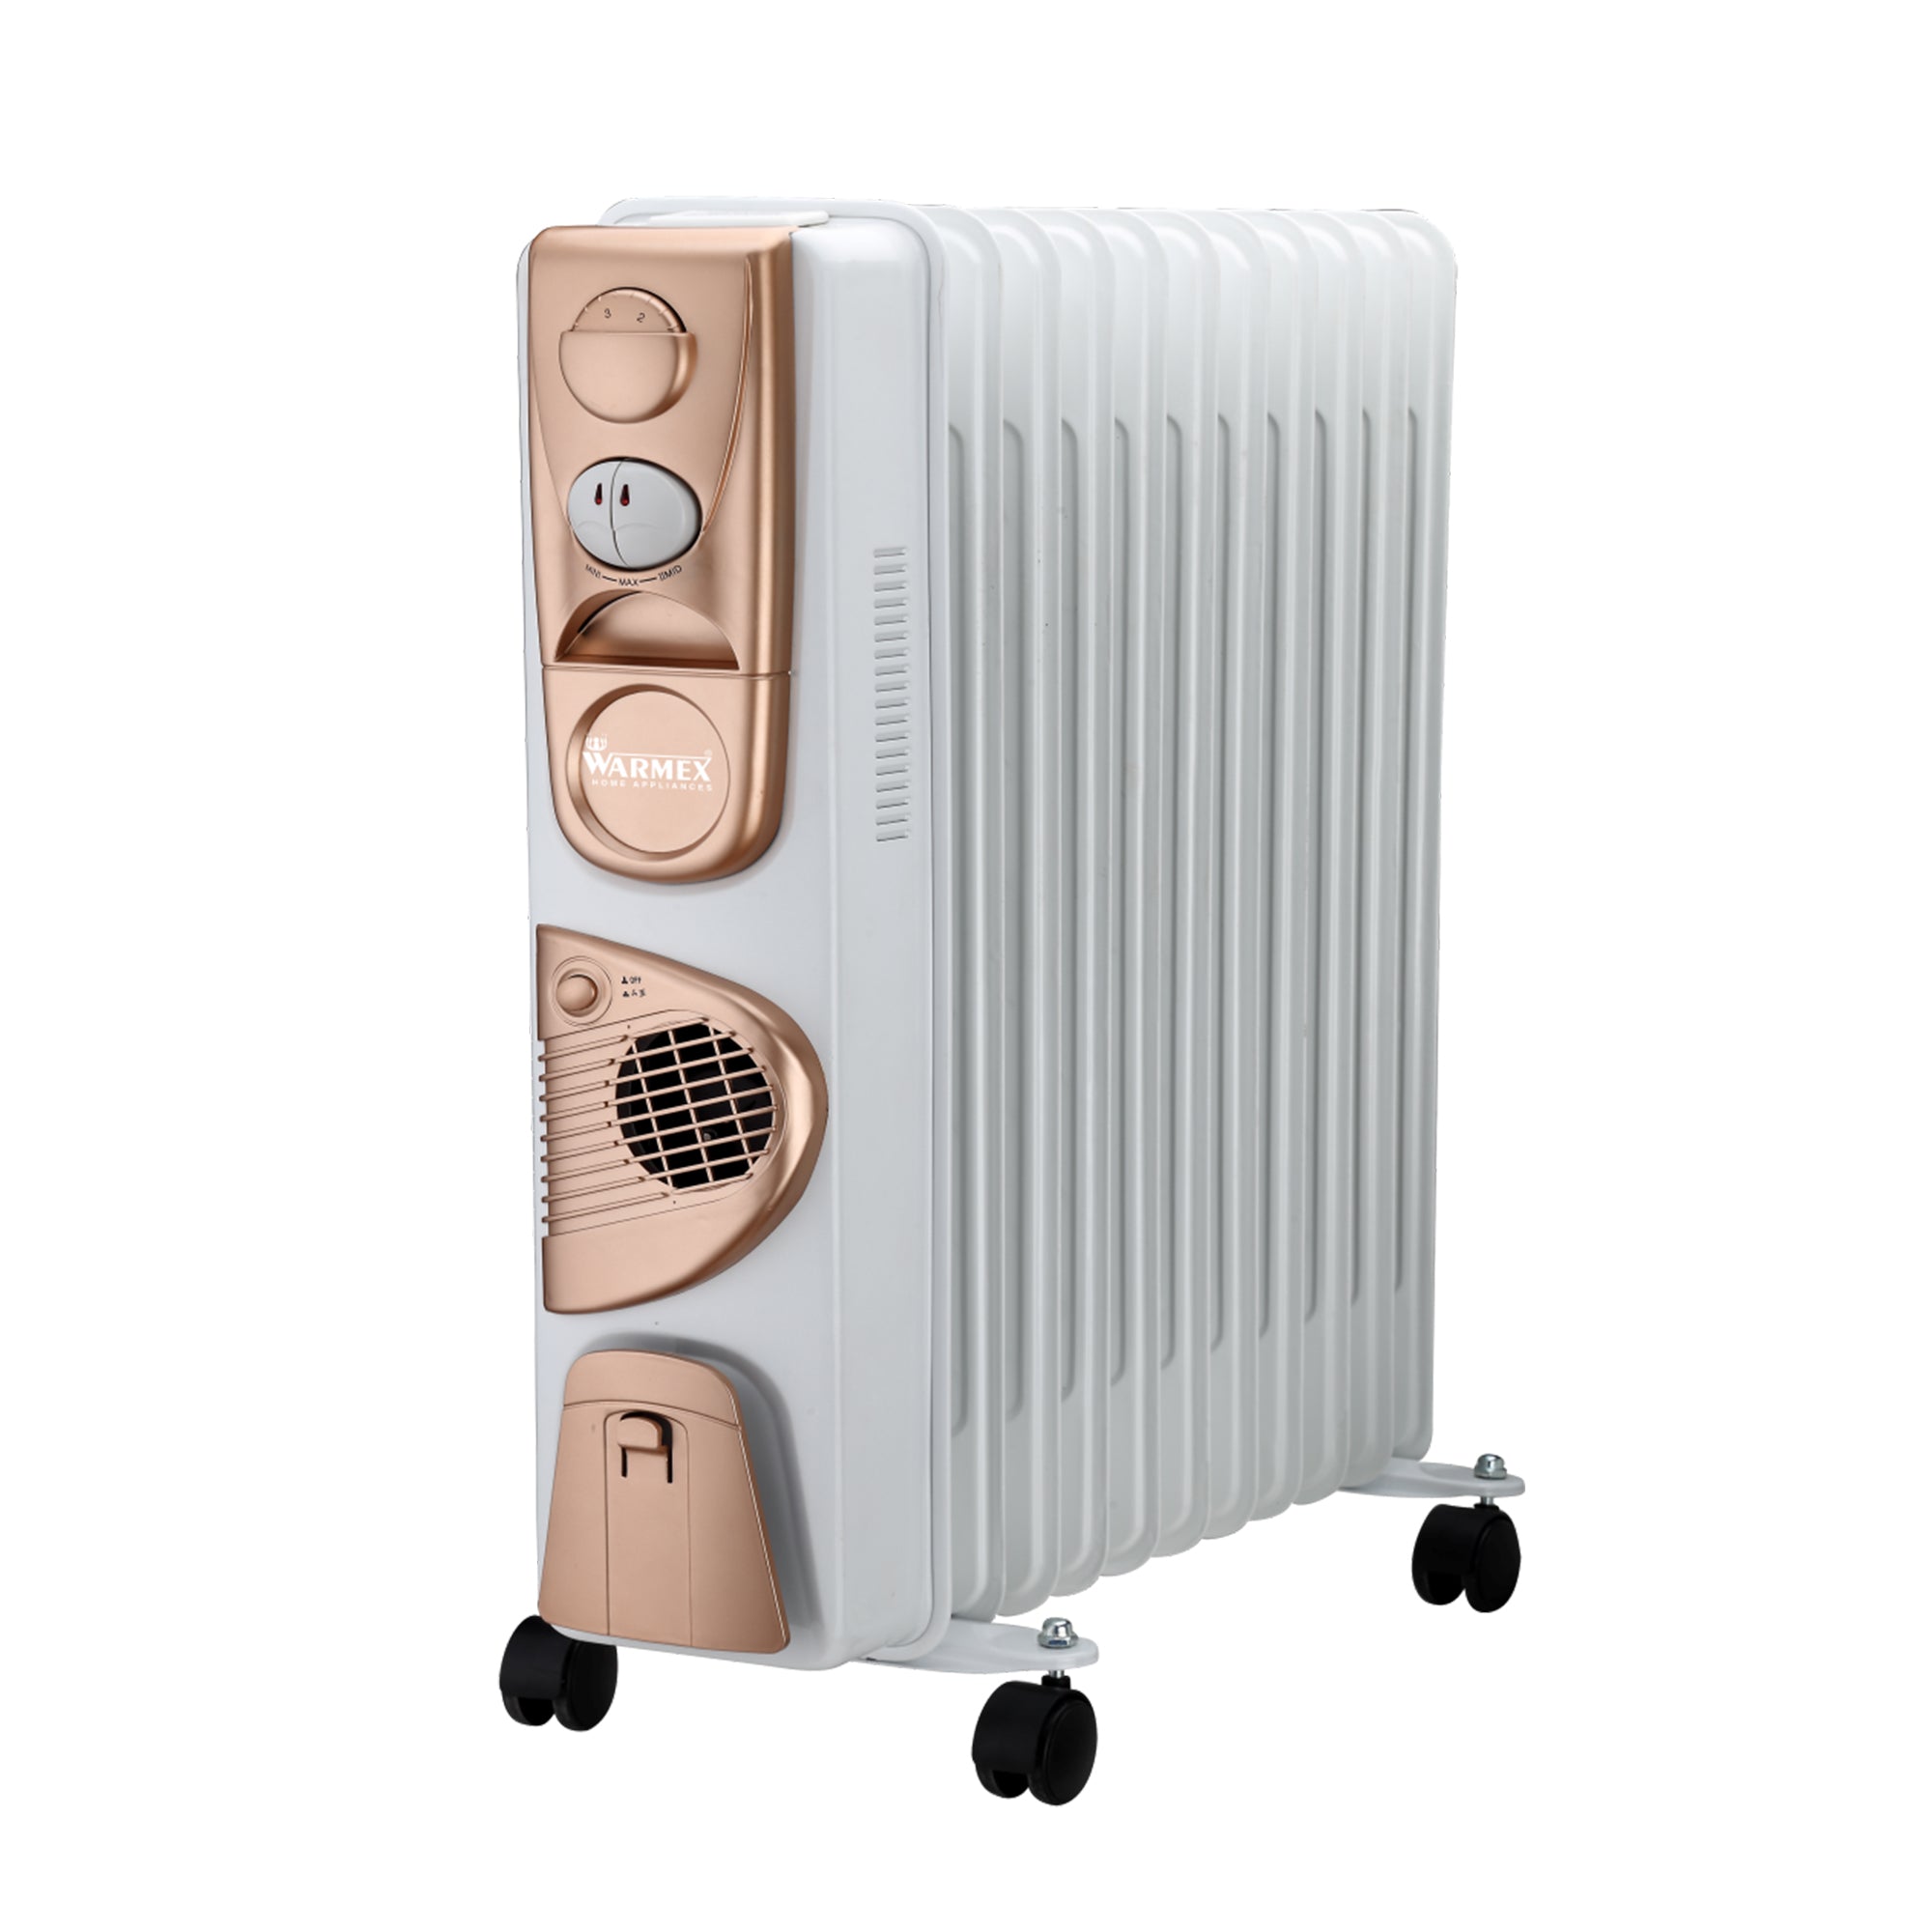 OFR-11 White & Gold warmexhomeappliances